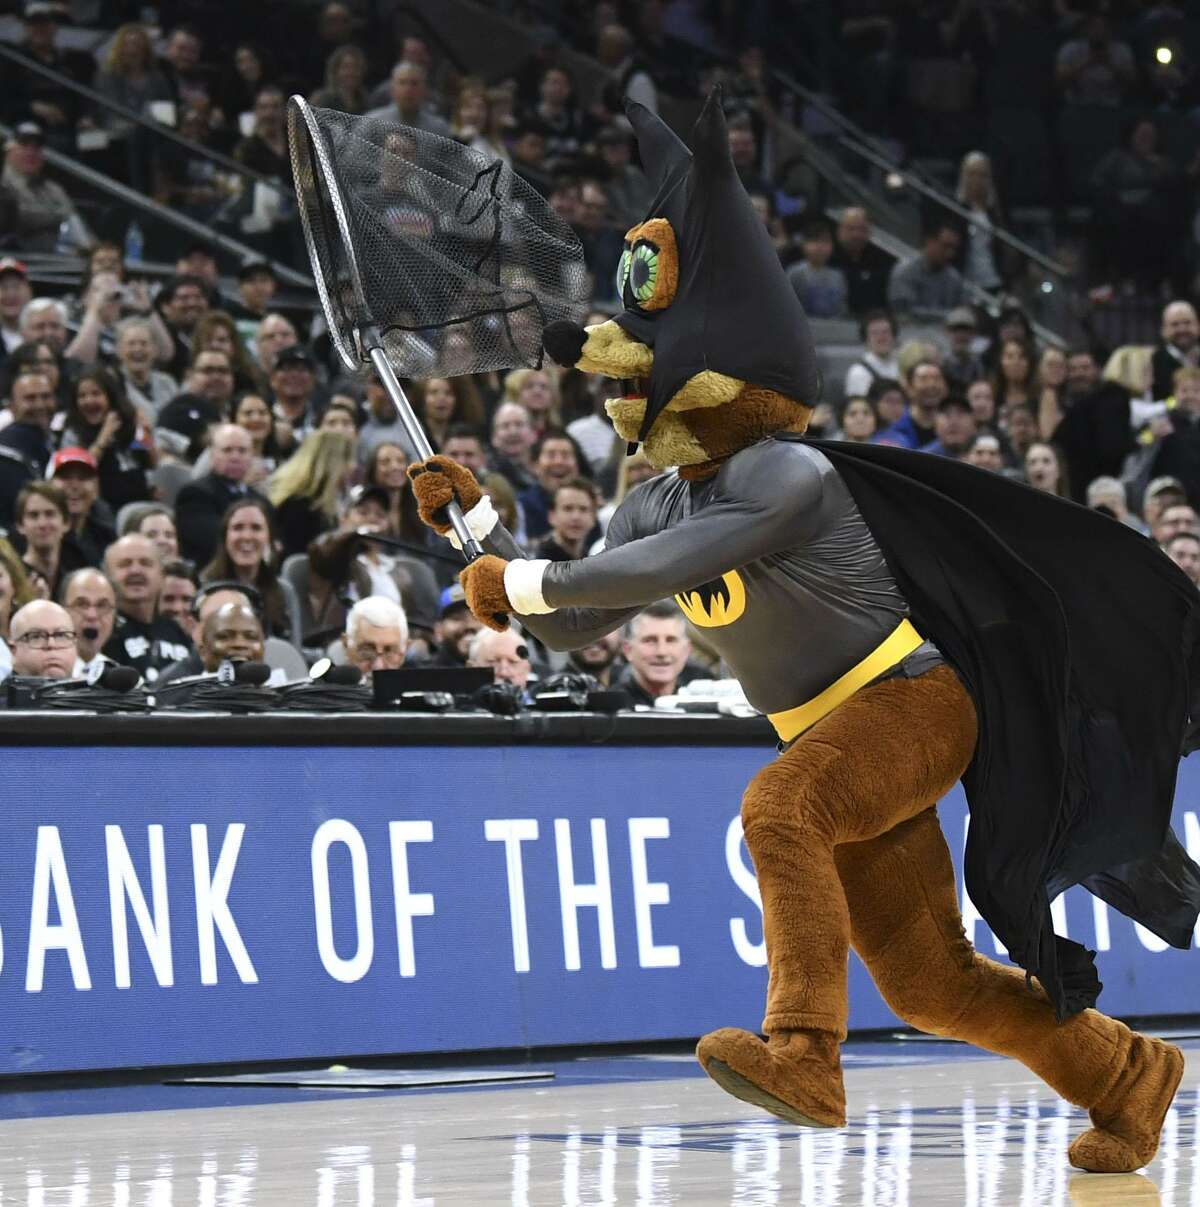 San Antonio Spurs mascot dressed as Batman catches an actual, real-life bat  during NBA game against the New Orleans Pelicans